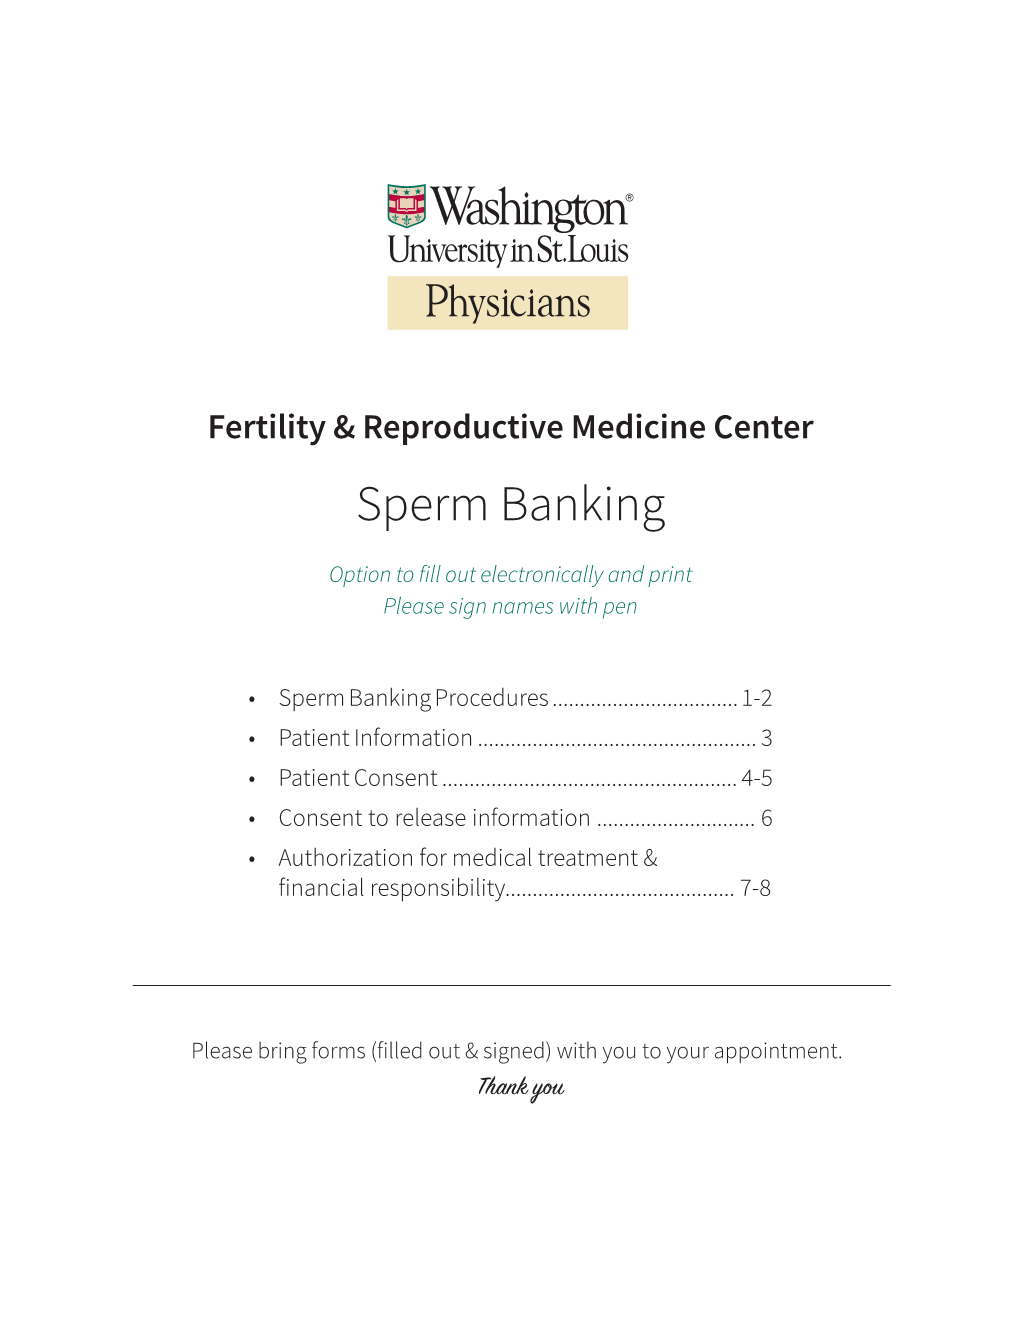 Sperm Banking Packet - Page 1 Sperm Banking Procedures Fertility and Reproductive Medicine Center Washington University Physicians and Barnes-Jewish Hospital